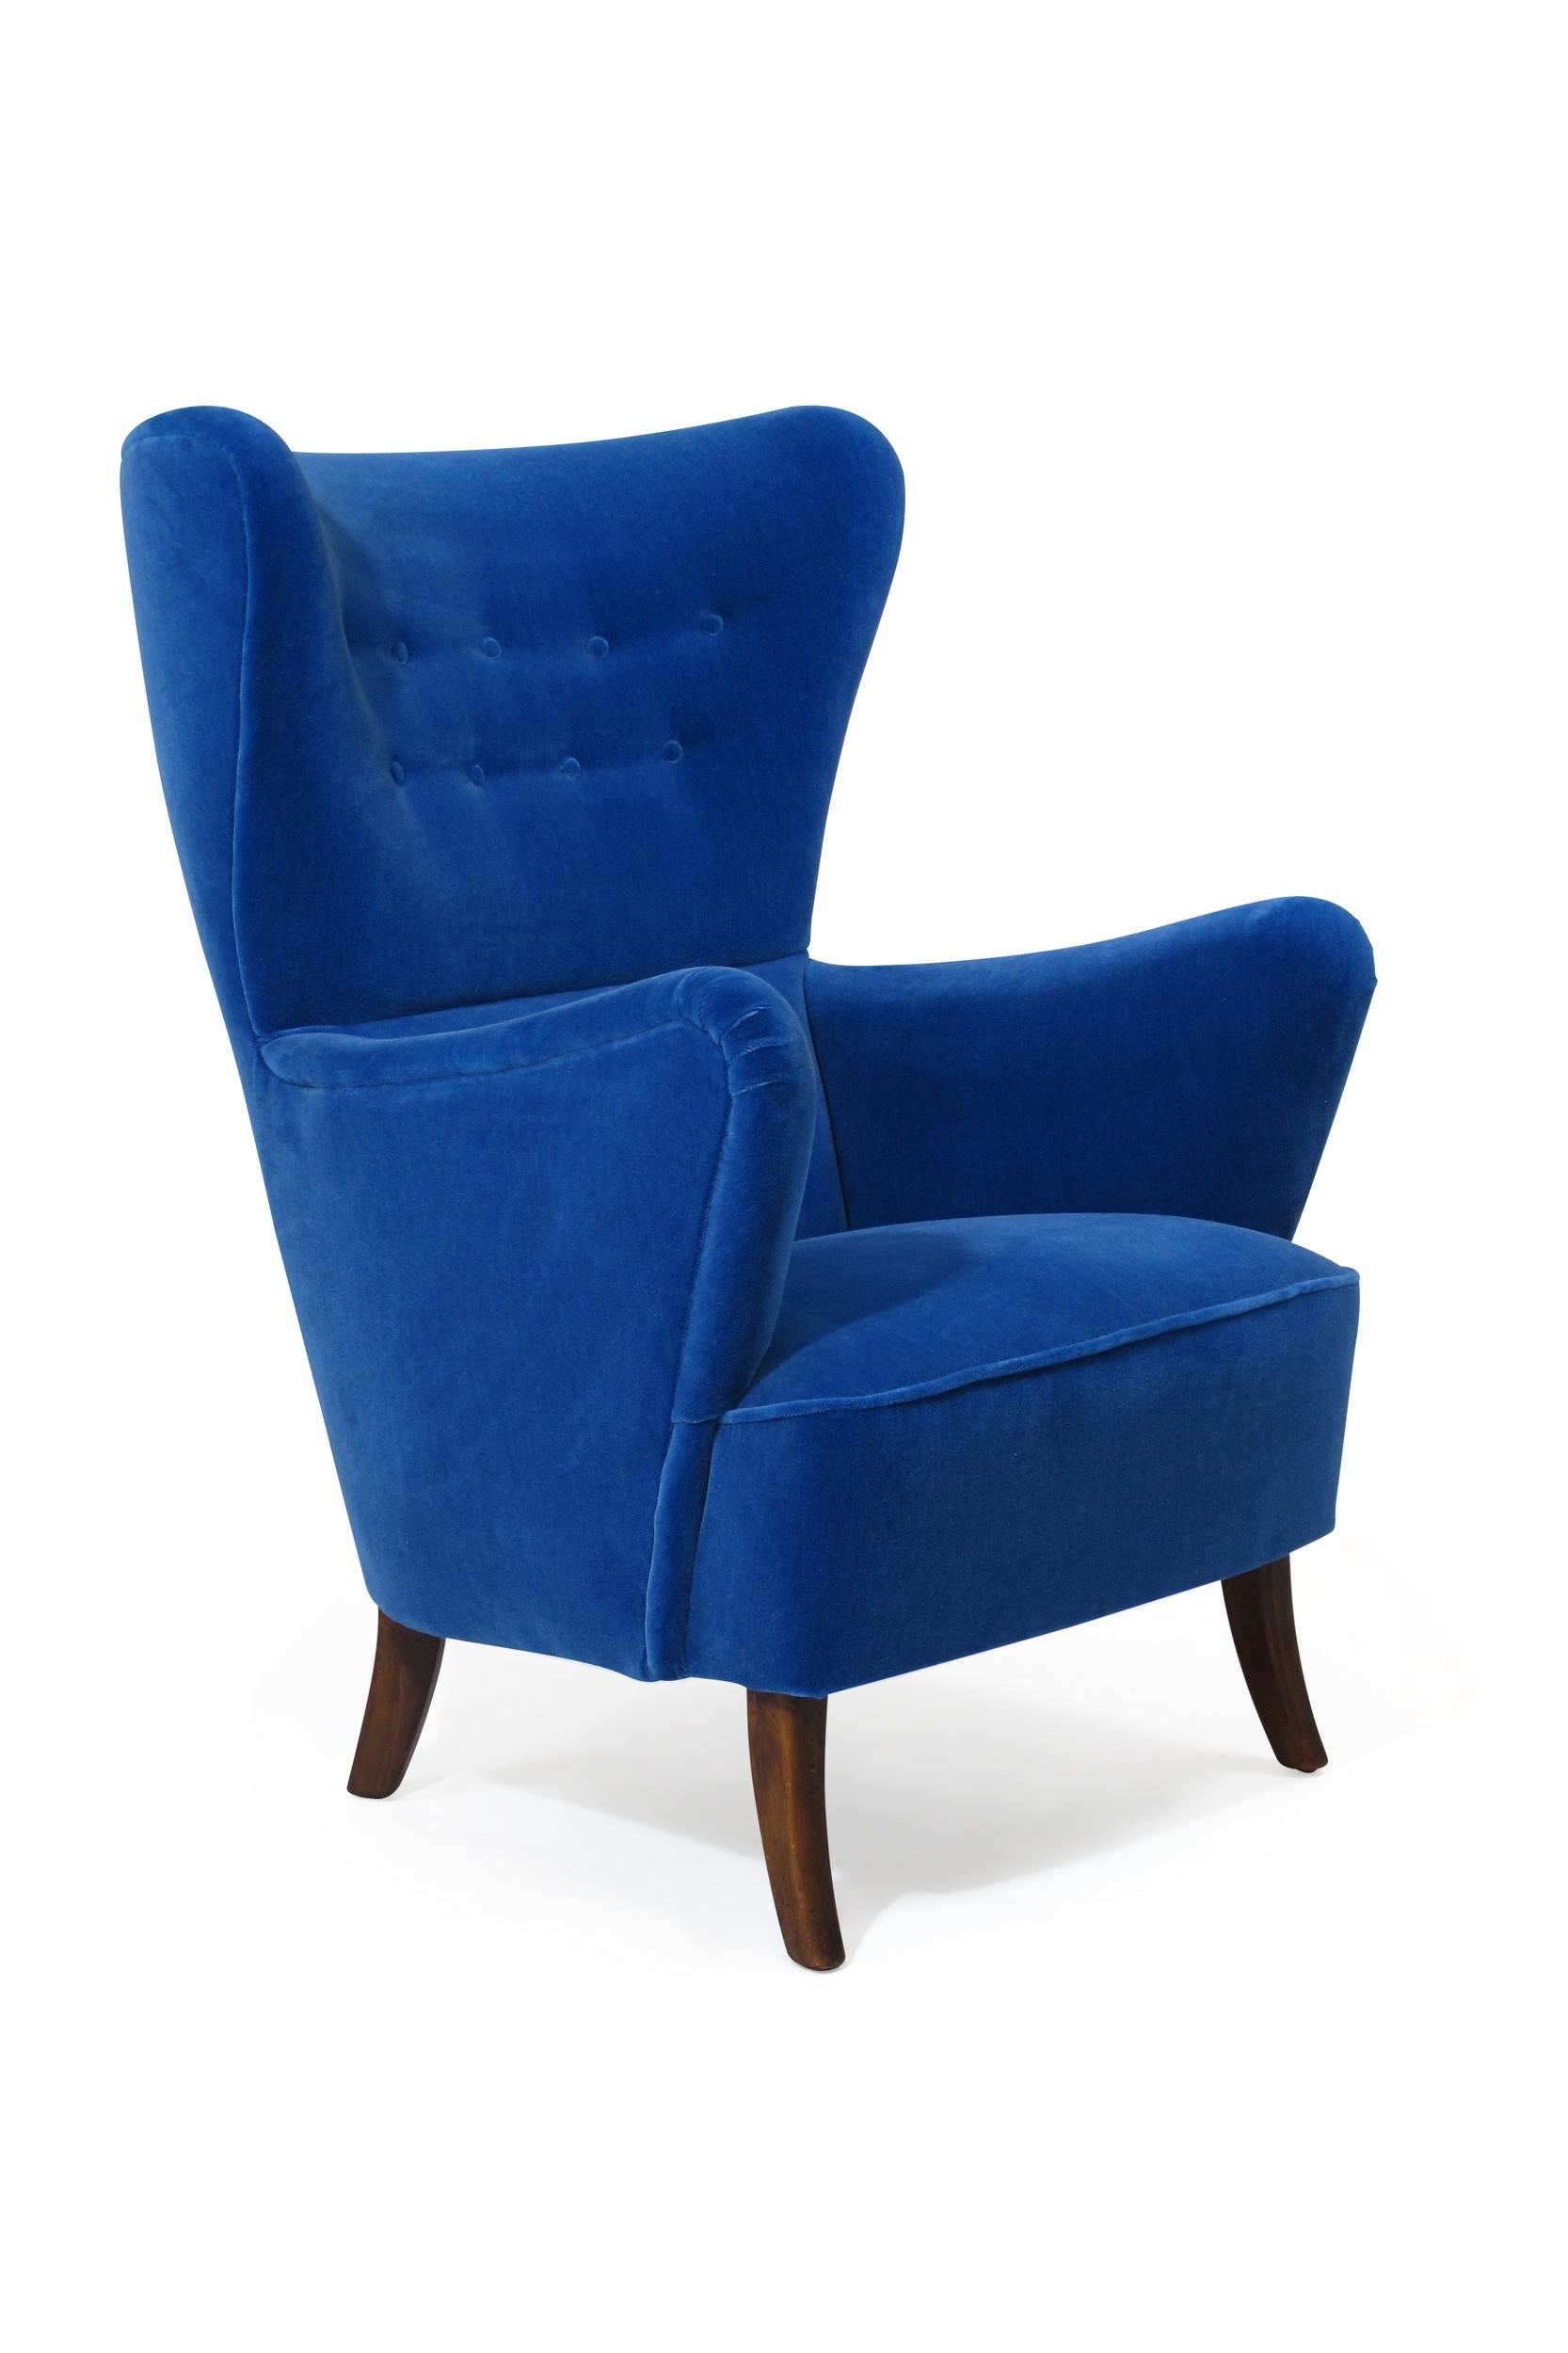 20th Century 1950s Highback Lounge Chair in Blue Mohair